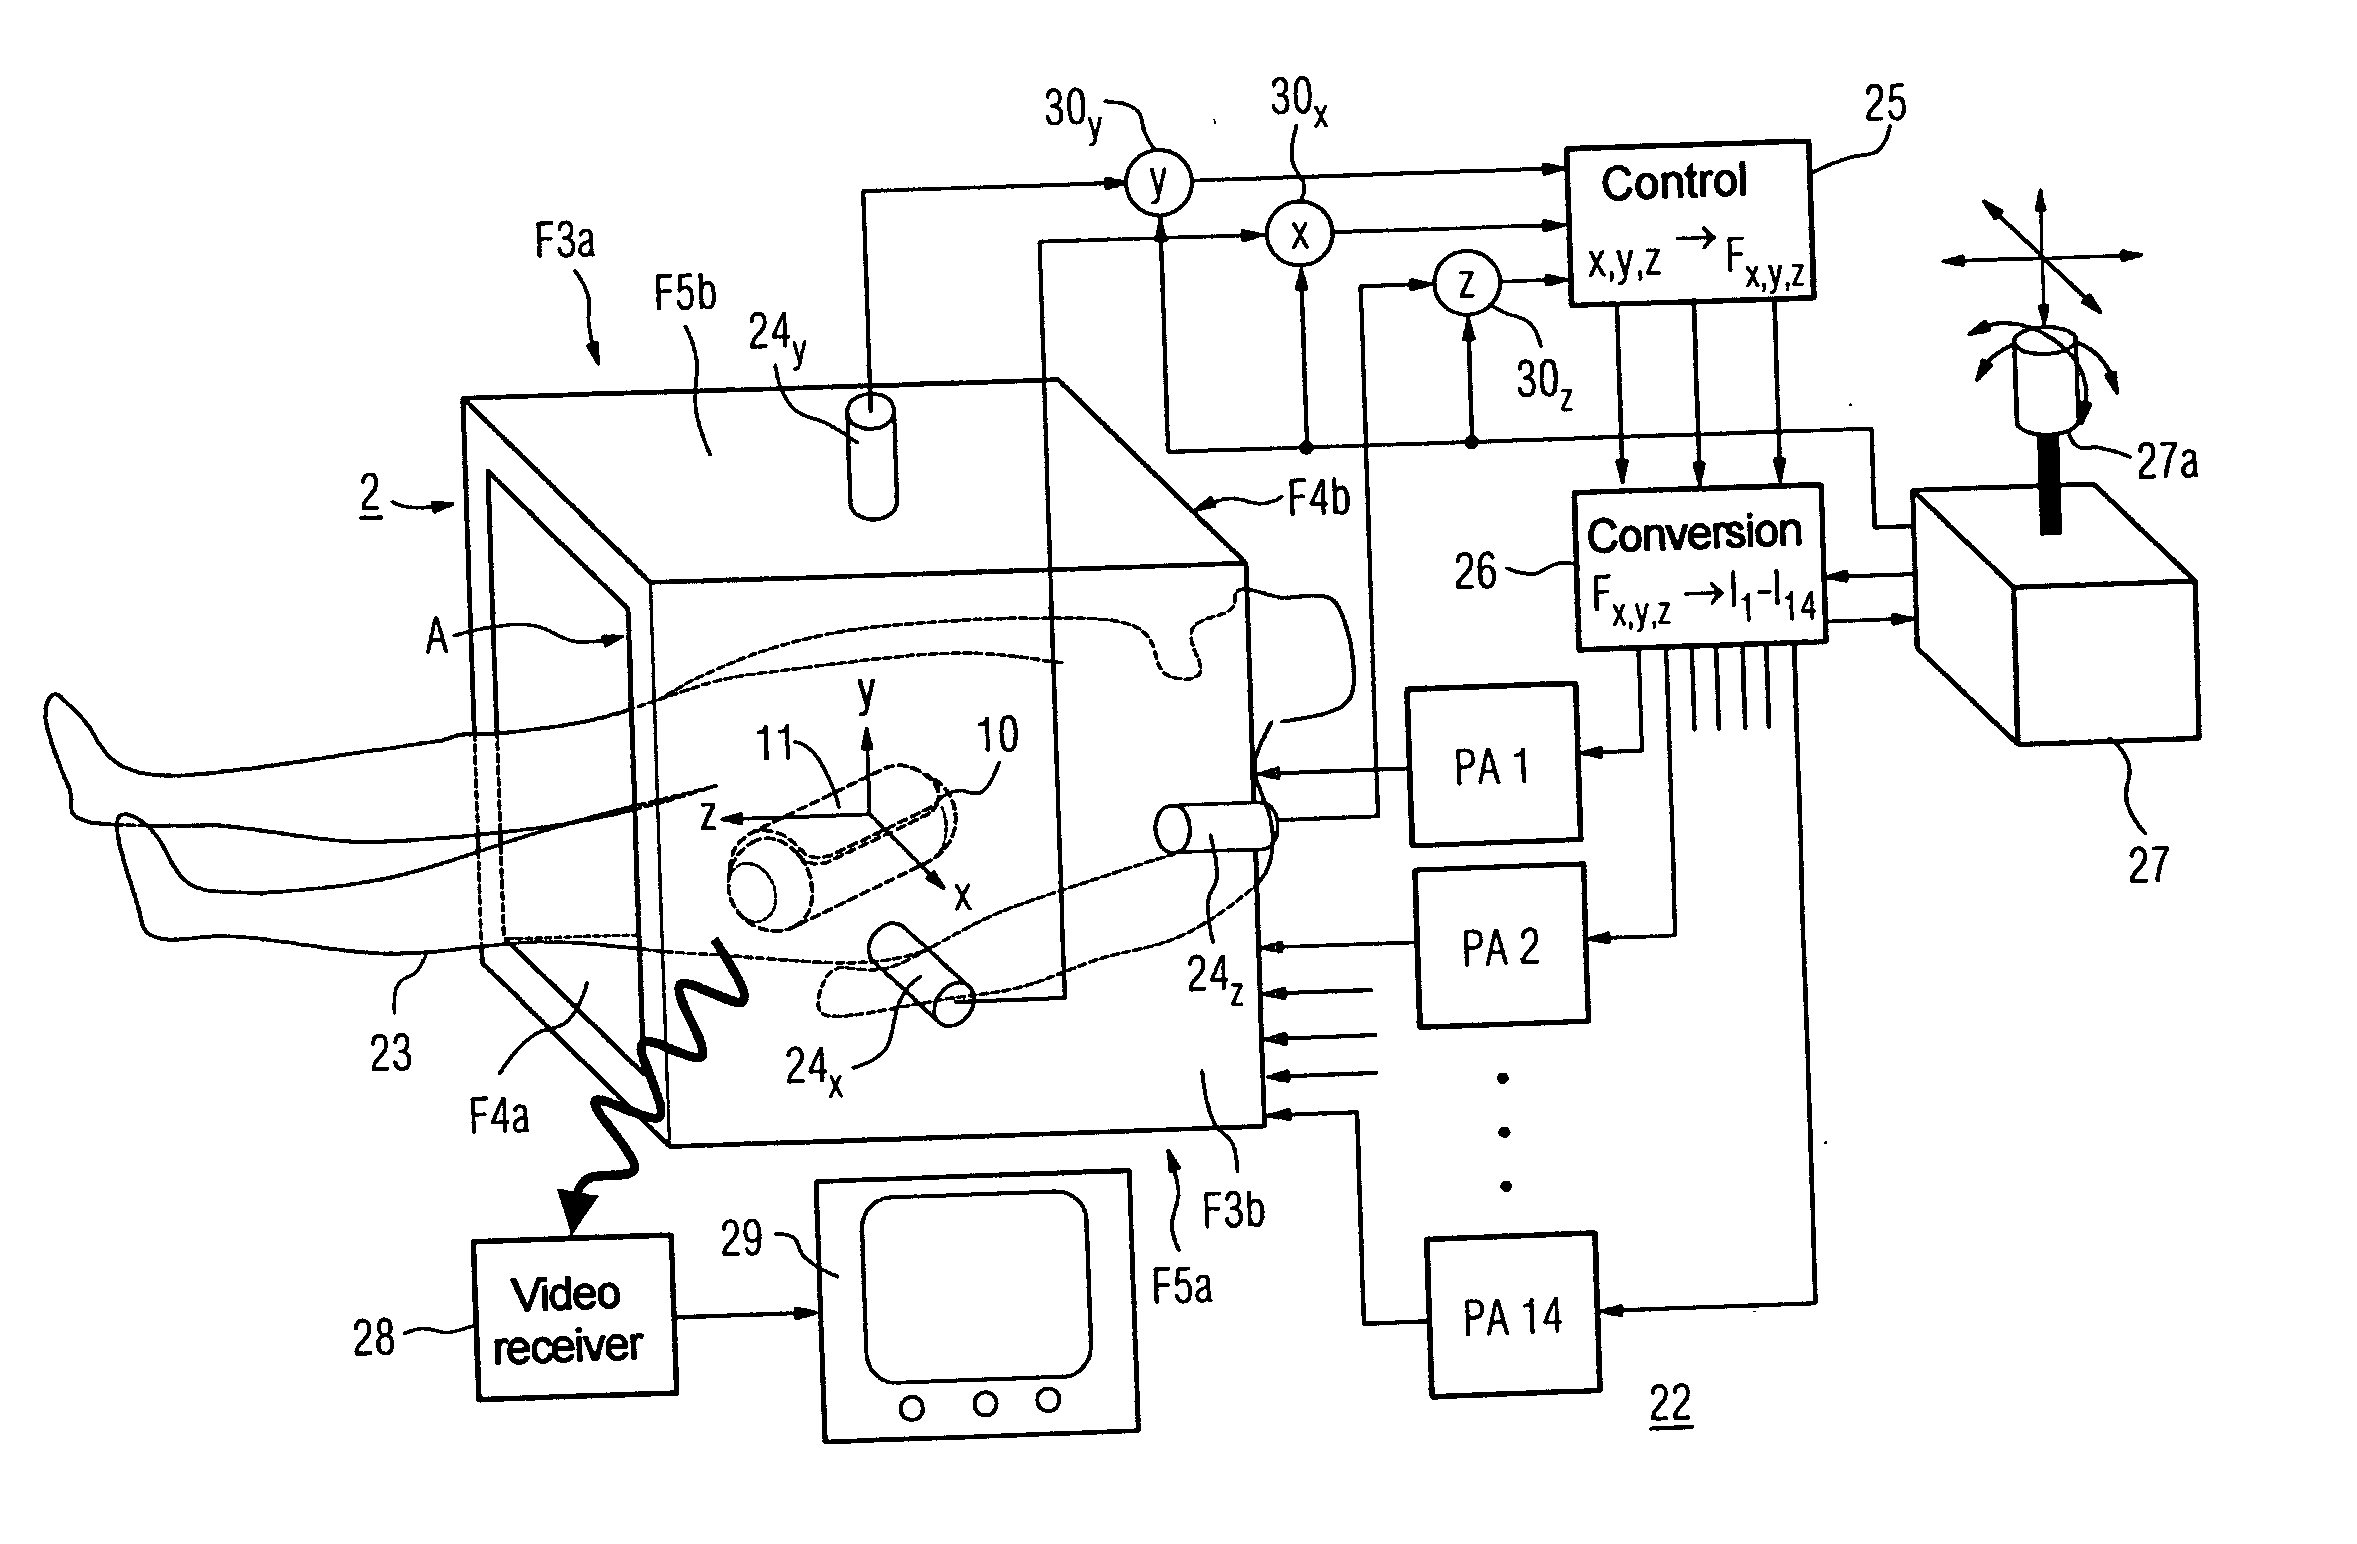 Magnetically navigable device with associated magnet element